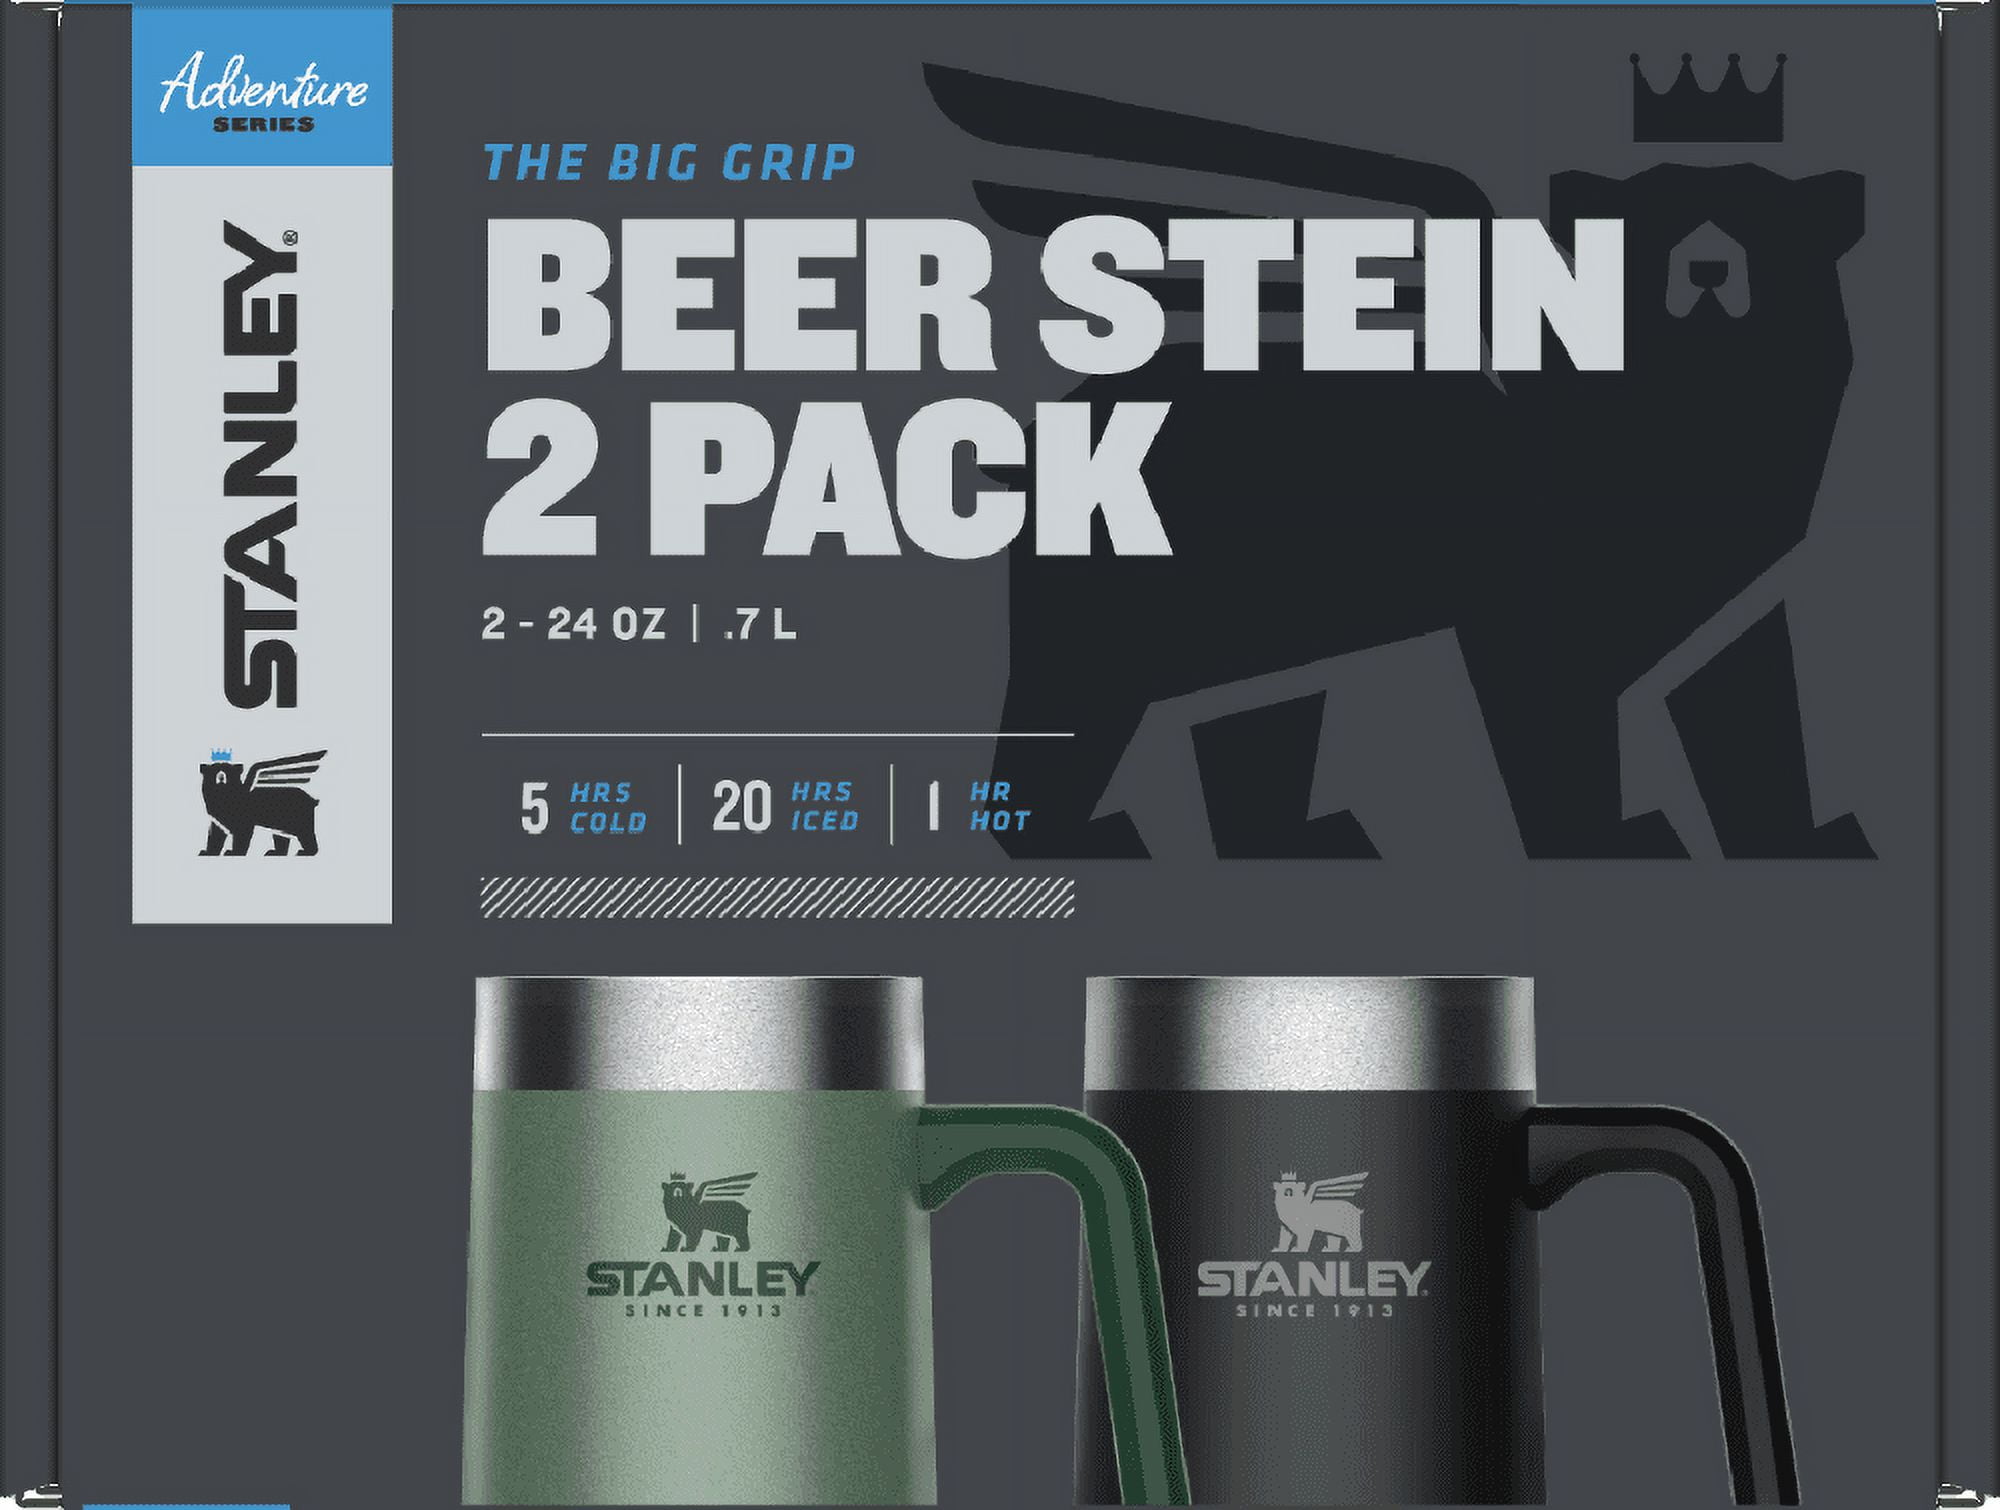 Stanley beer stein 7L Available in stock 5hrs - cold 20hrs